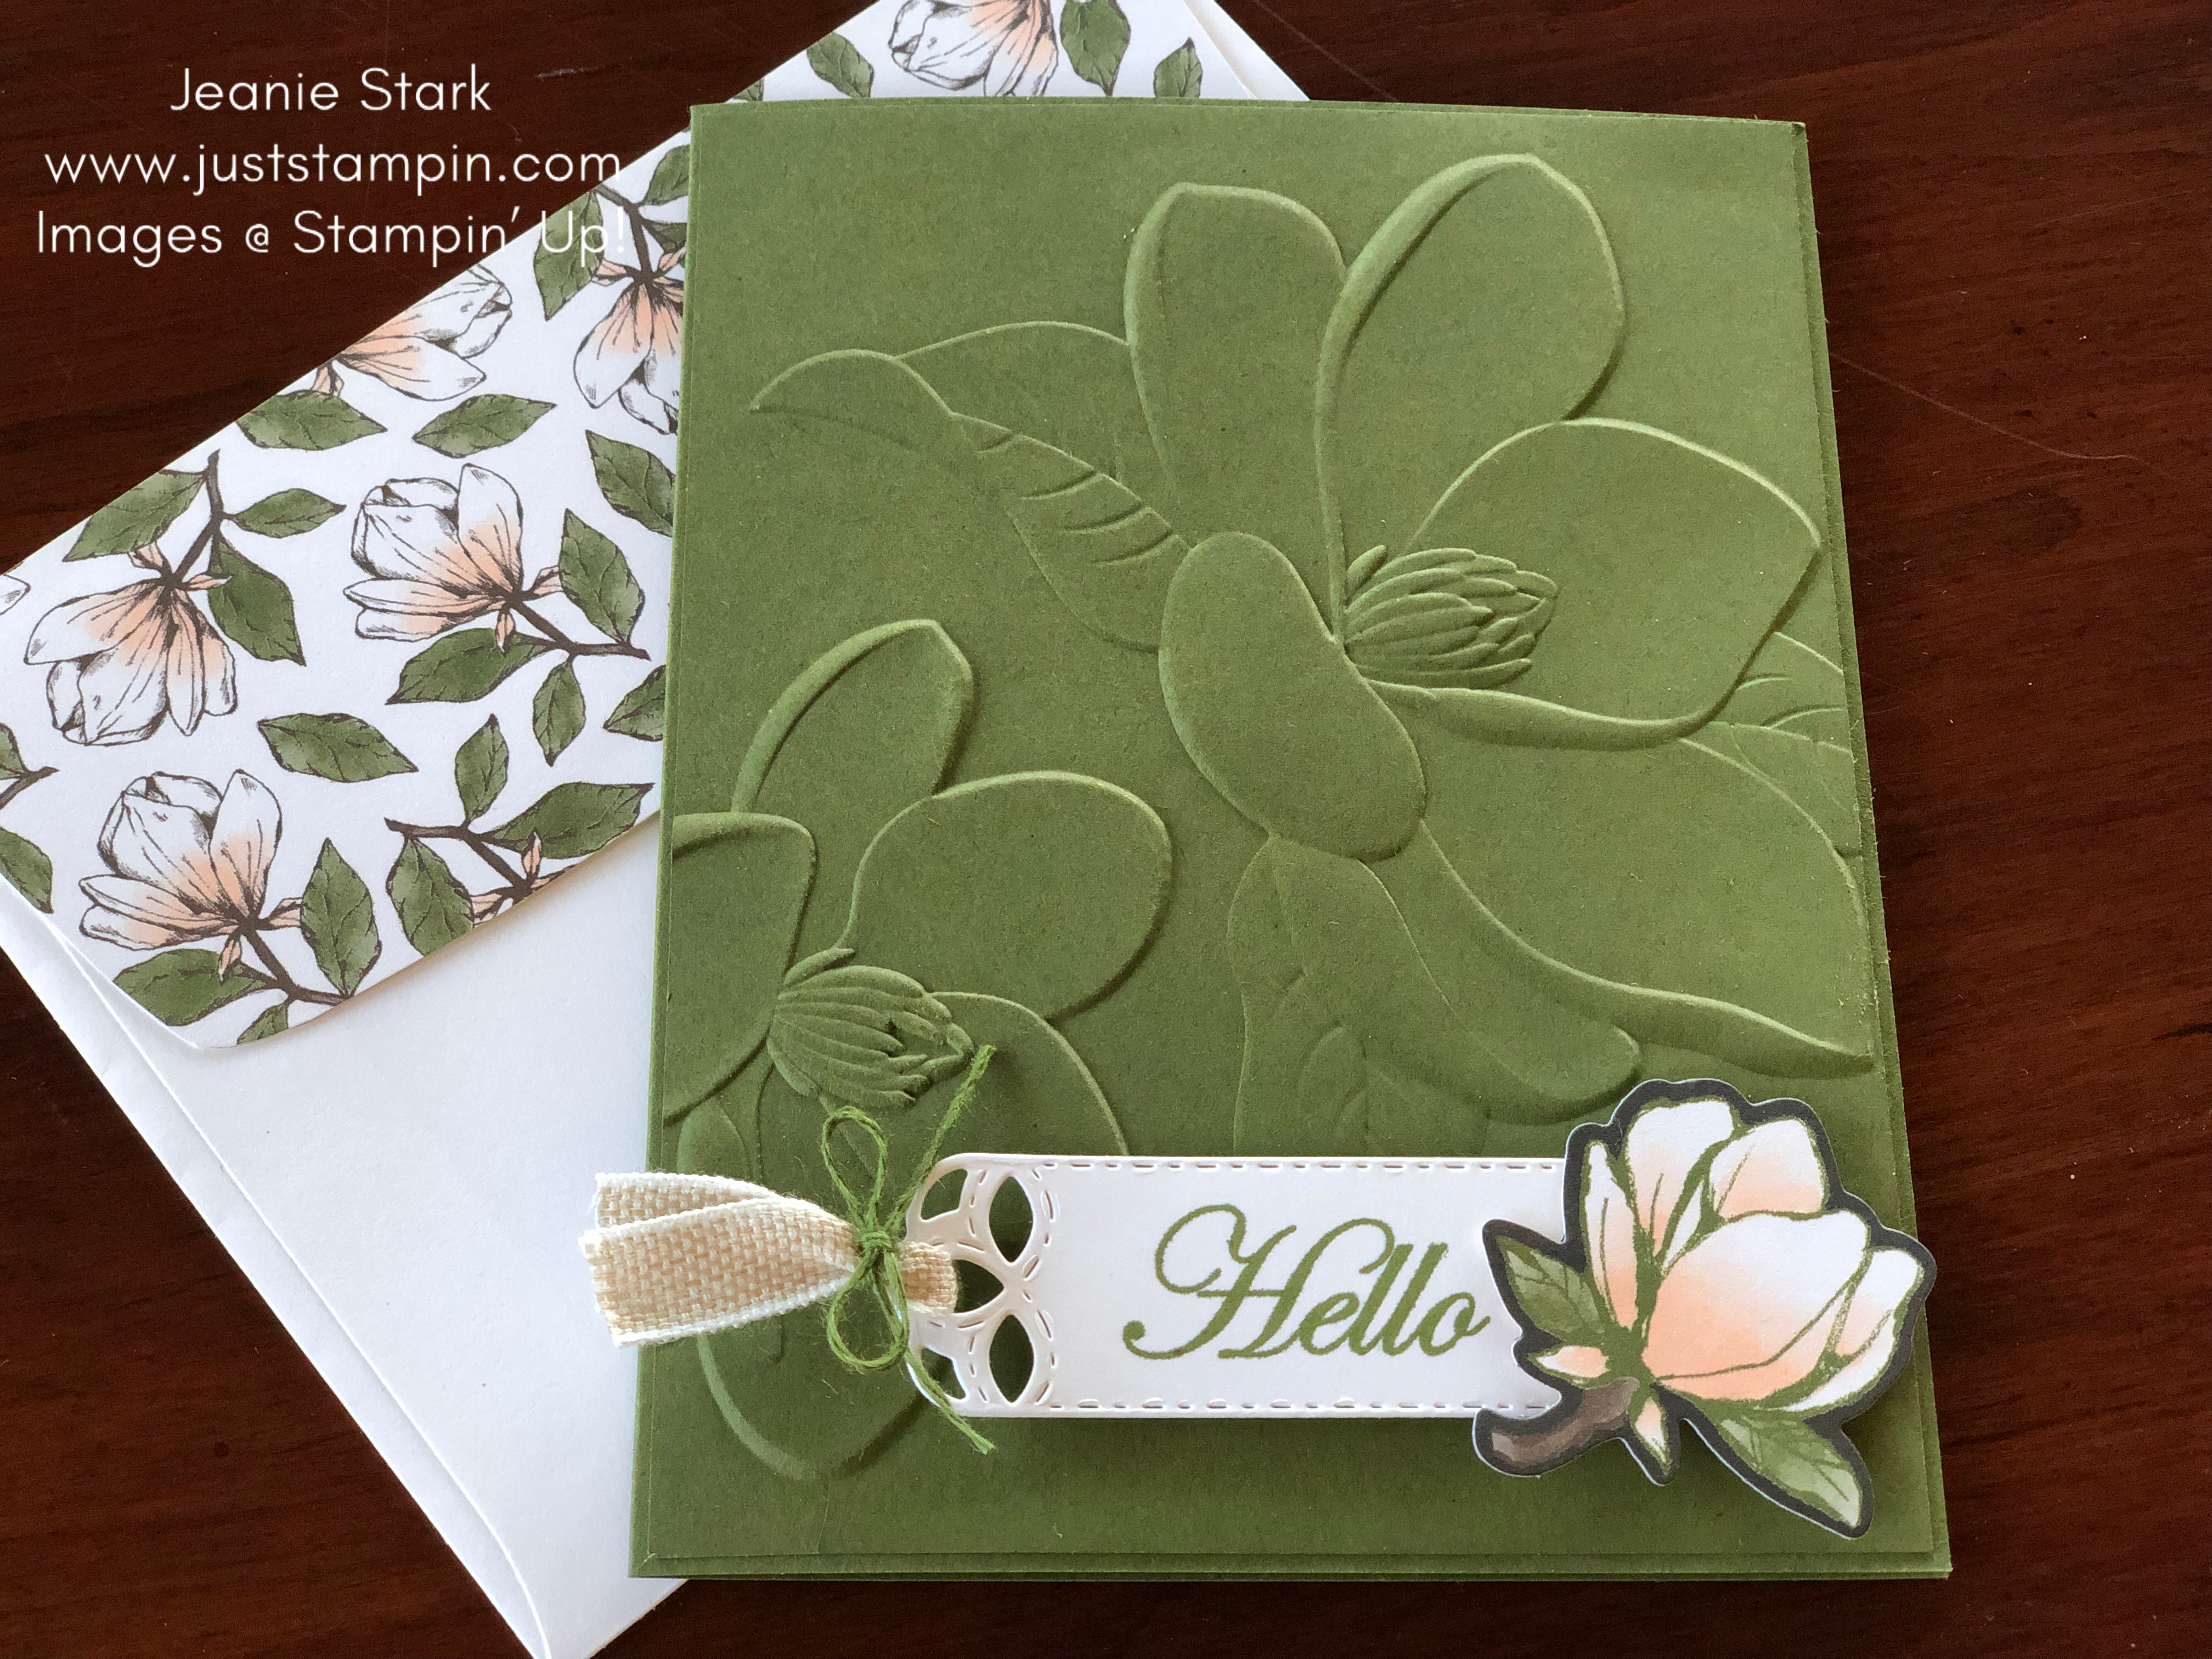 Stampin' Up! Magnolia Lane All Occasion Card idea - Jeanie Stark StampinUp